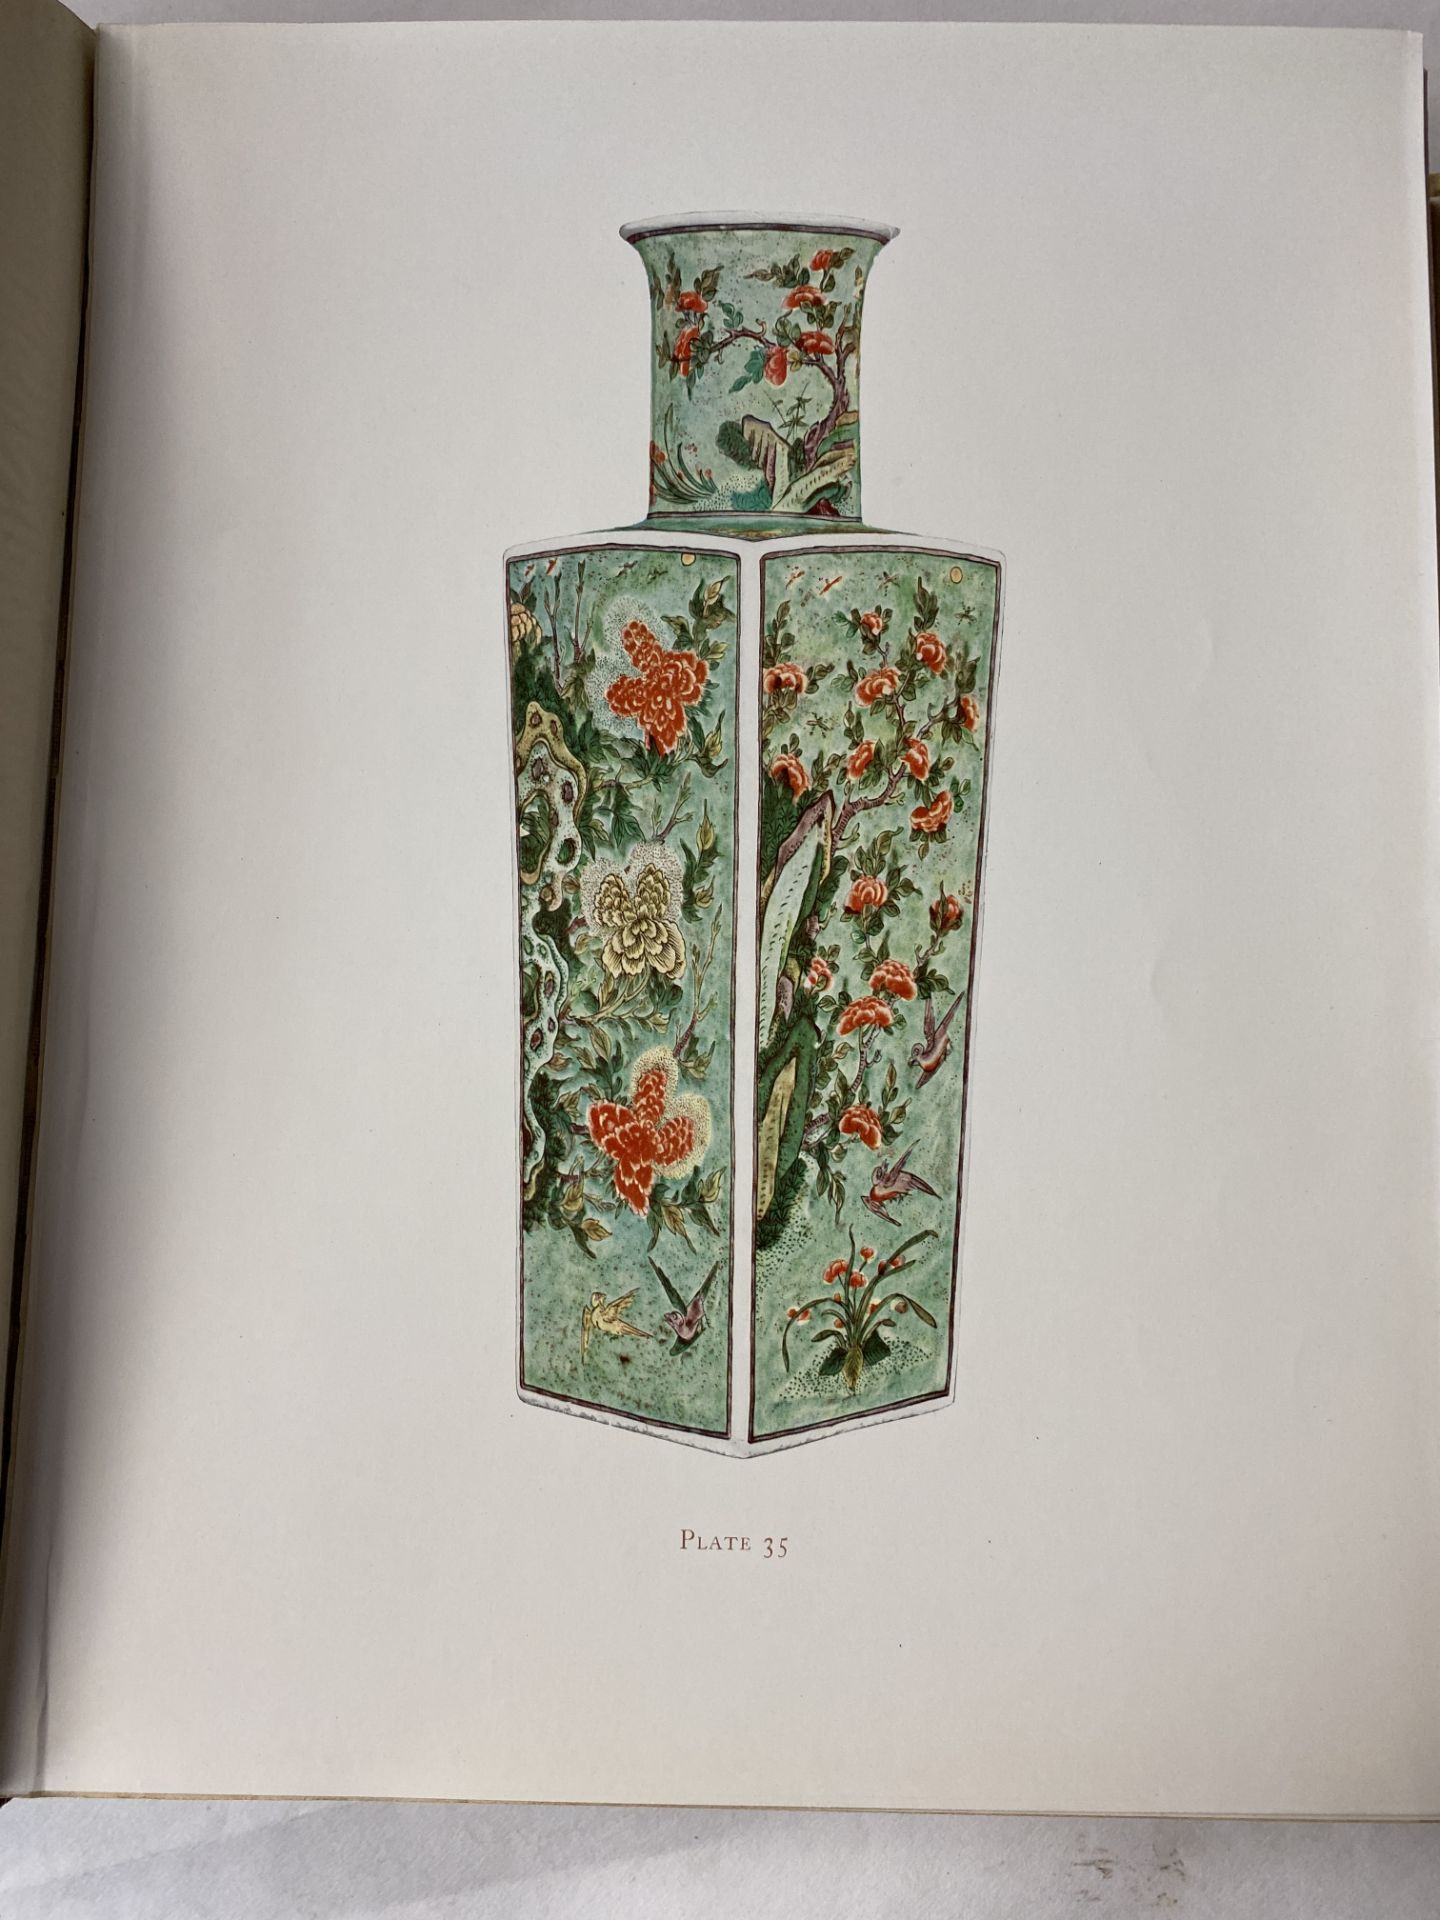 Art Reference Books on Asian Art - Chinese - Image 5 of 10